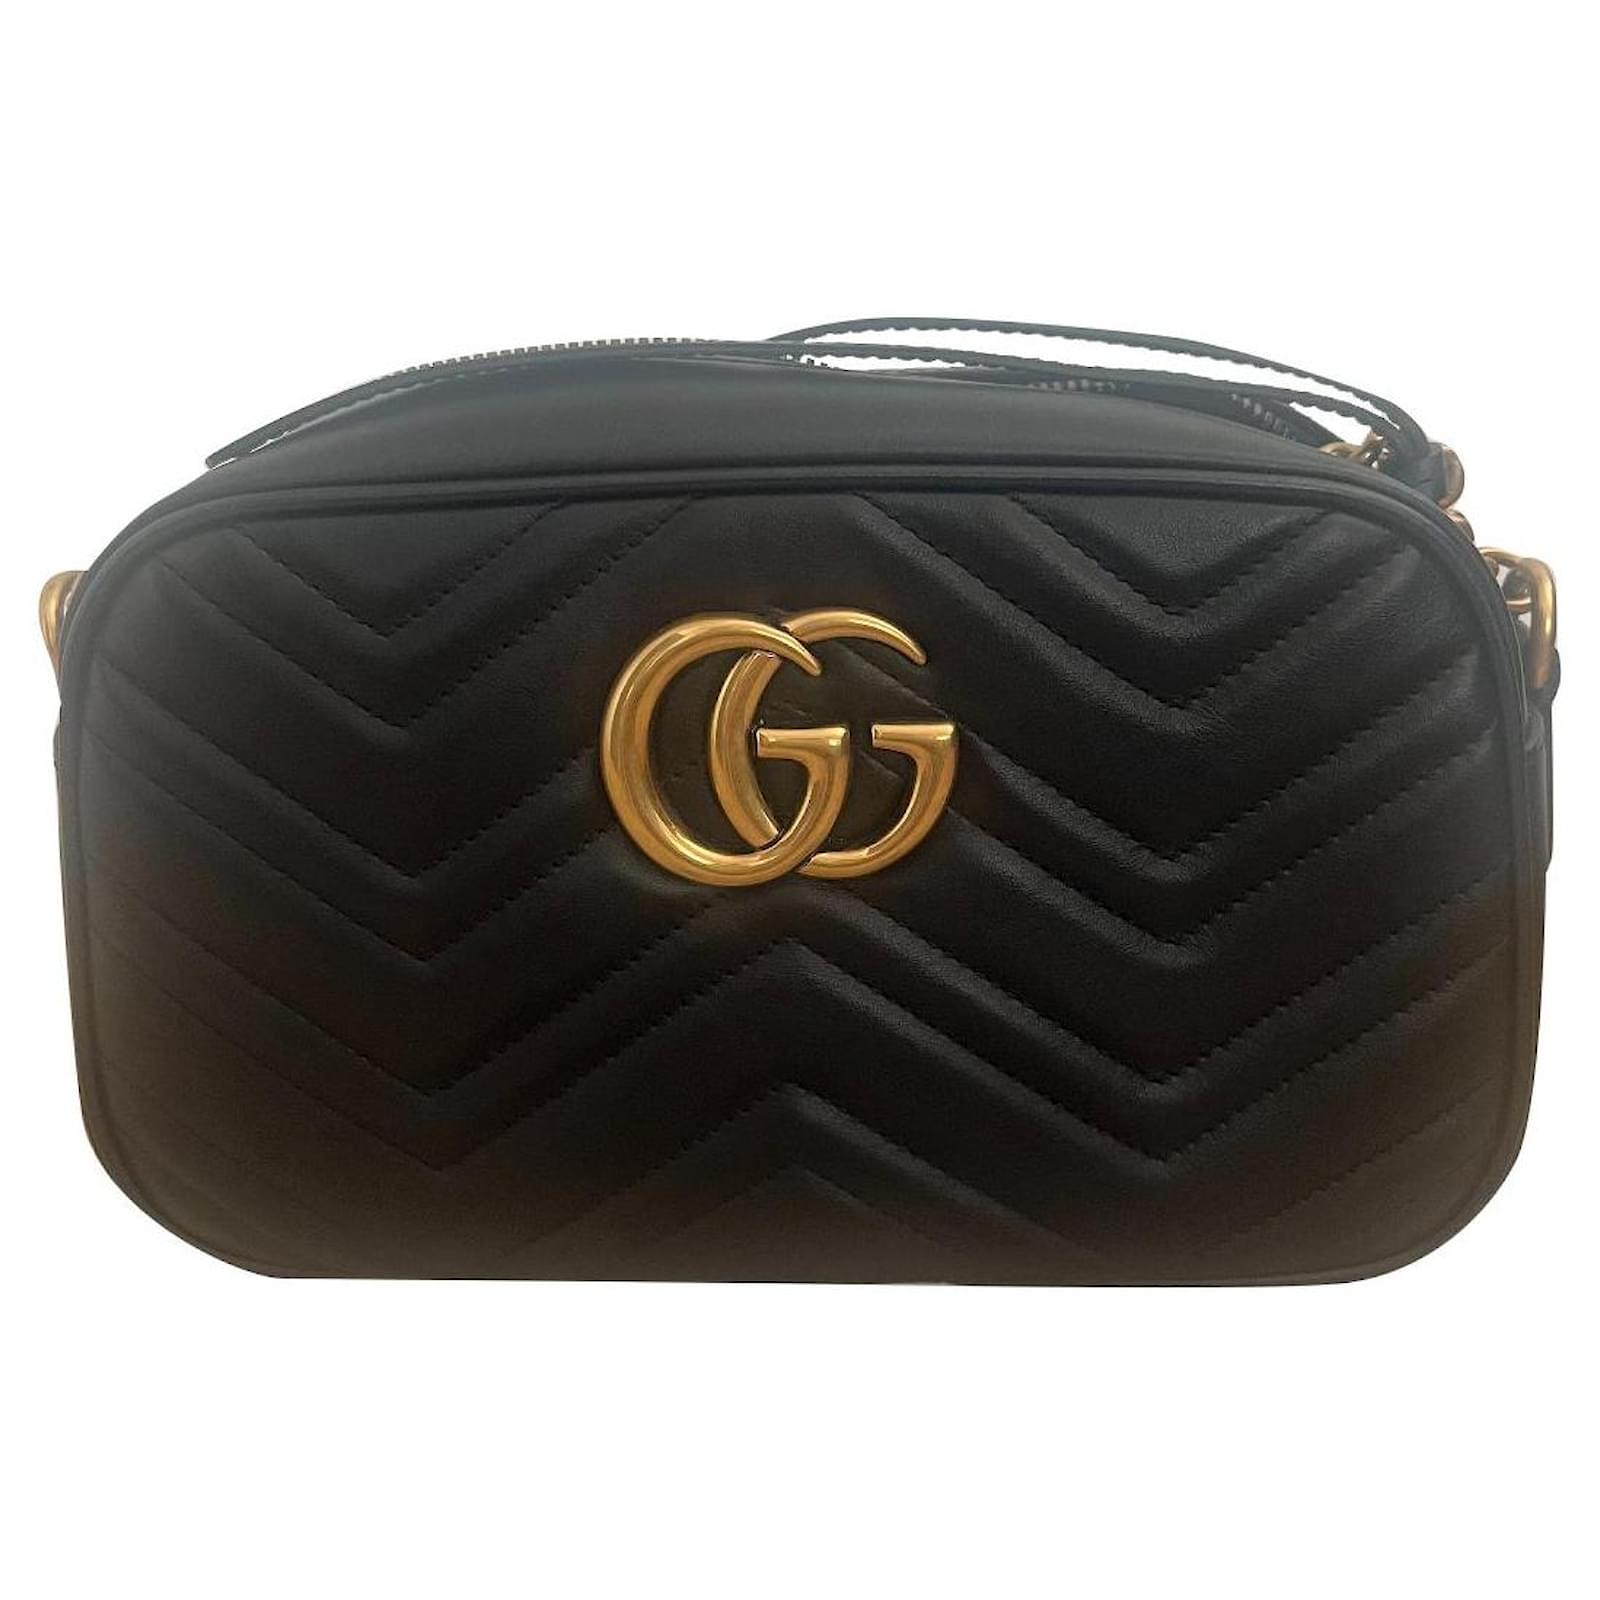 Gucci - GG Marmont Quilted-leather Shoulder Bag - Womens - Black